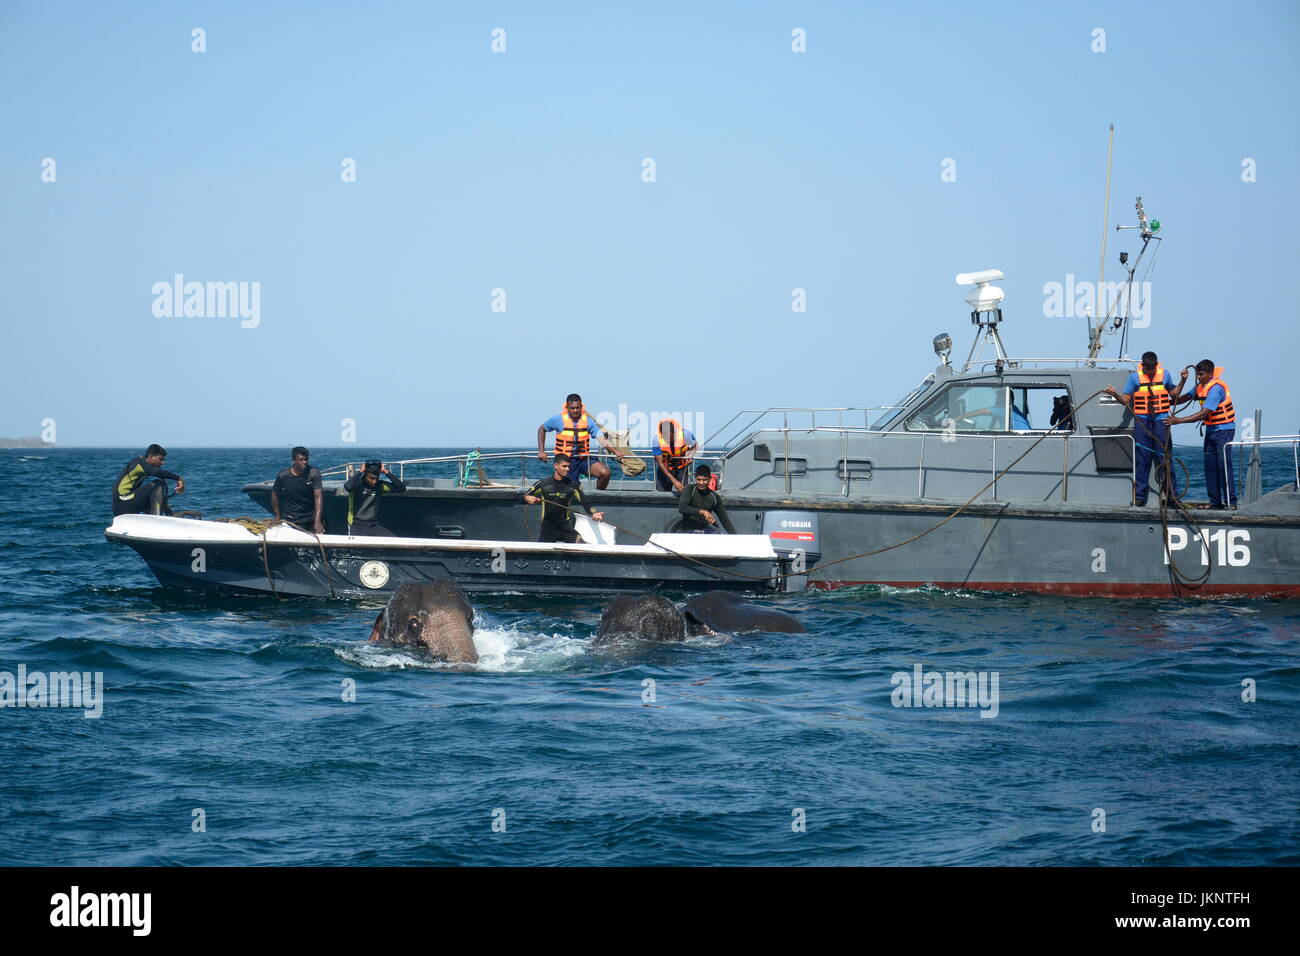 Trincomalee, Sri Lanka. 23rd July, 2017. A patrol craft from Sri Lankan Navy conducts a rescue mission to save the elephants in the sea in between Round Island and Foul Point in Trincomalee, in the east of Sri Lanka, July 23, 2017. Two elephants on Sunday were swept out to deep sea in the east of Sri Lanka. Responding to the situation, a combined rescue mission was launched by the navy and the officials from the Department of Wildlife in Trincomalee to save the two wild elephants. Credit: Xinhua/Alamy Live News Stock Photo